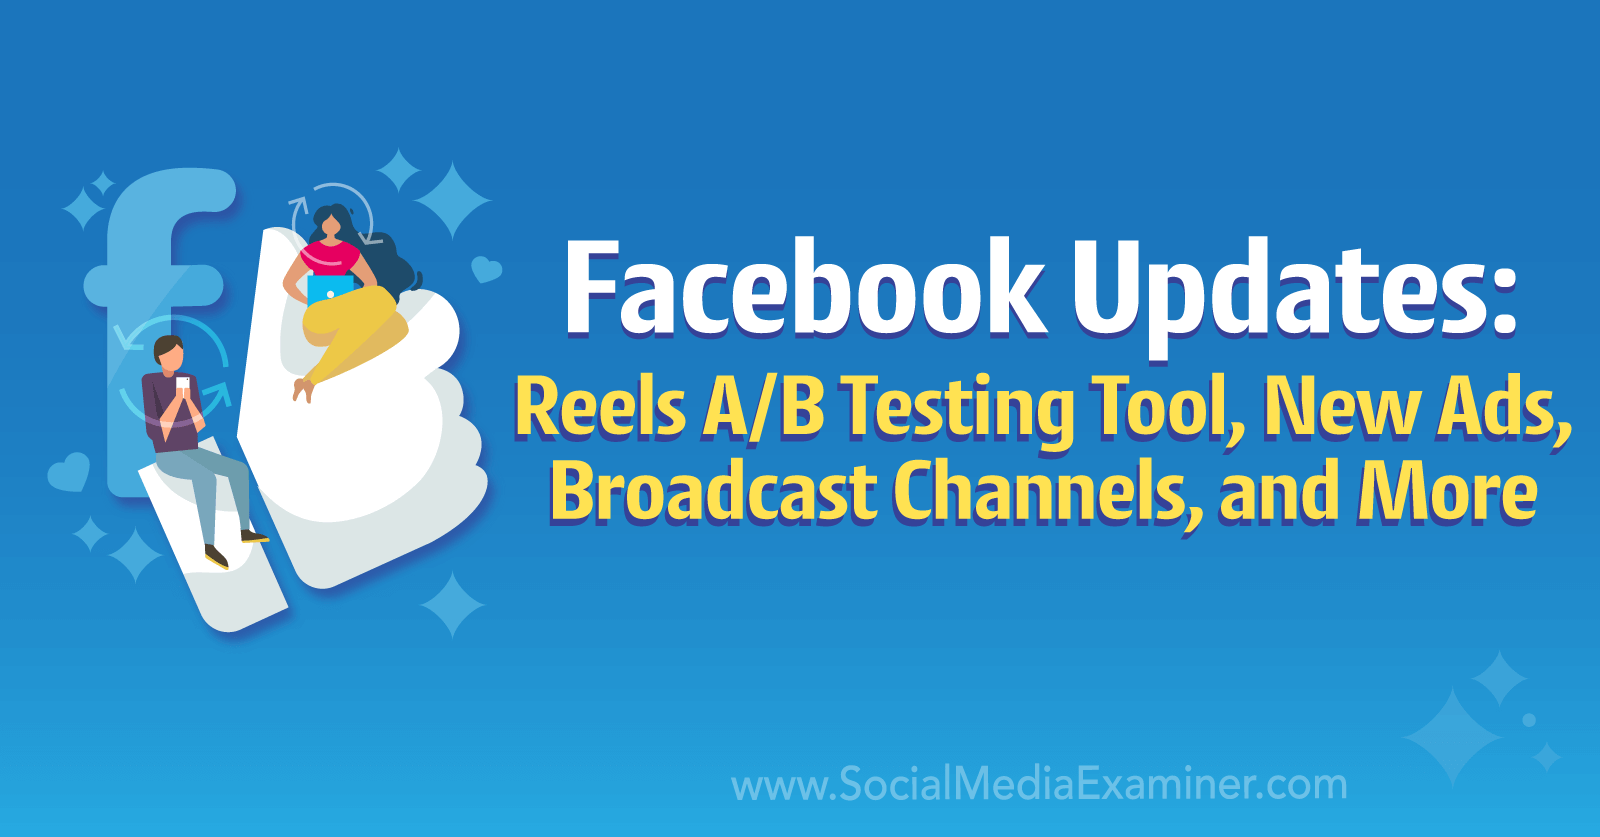 Facebook Updates: Reels A/B Testing Tool, New Ads, Broadcast Channels, and More by Social Media Examiner